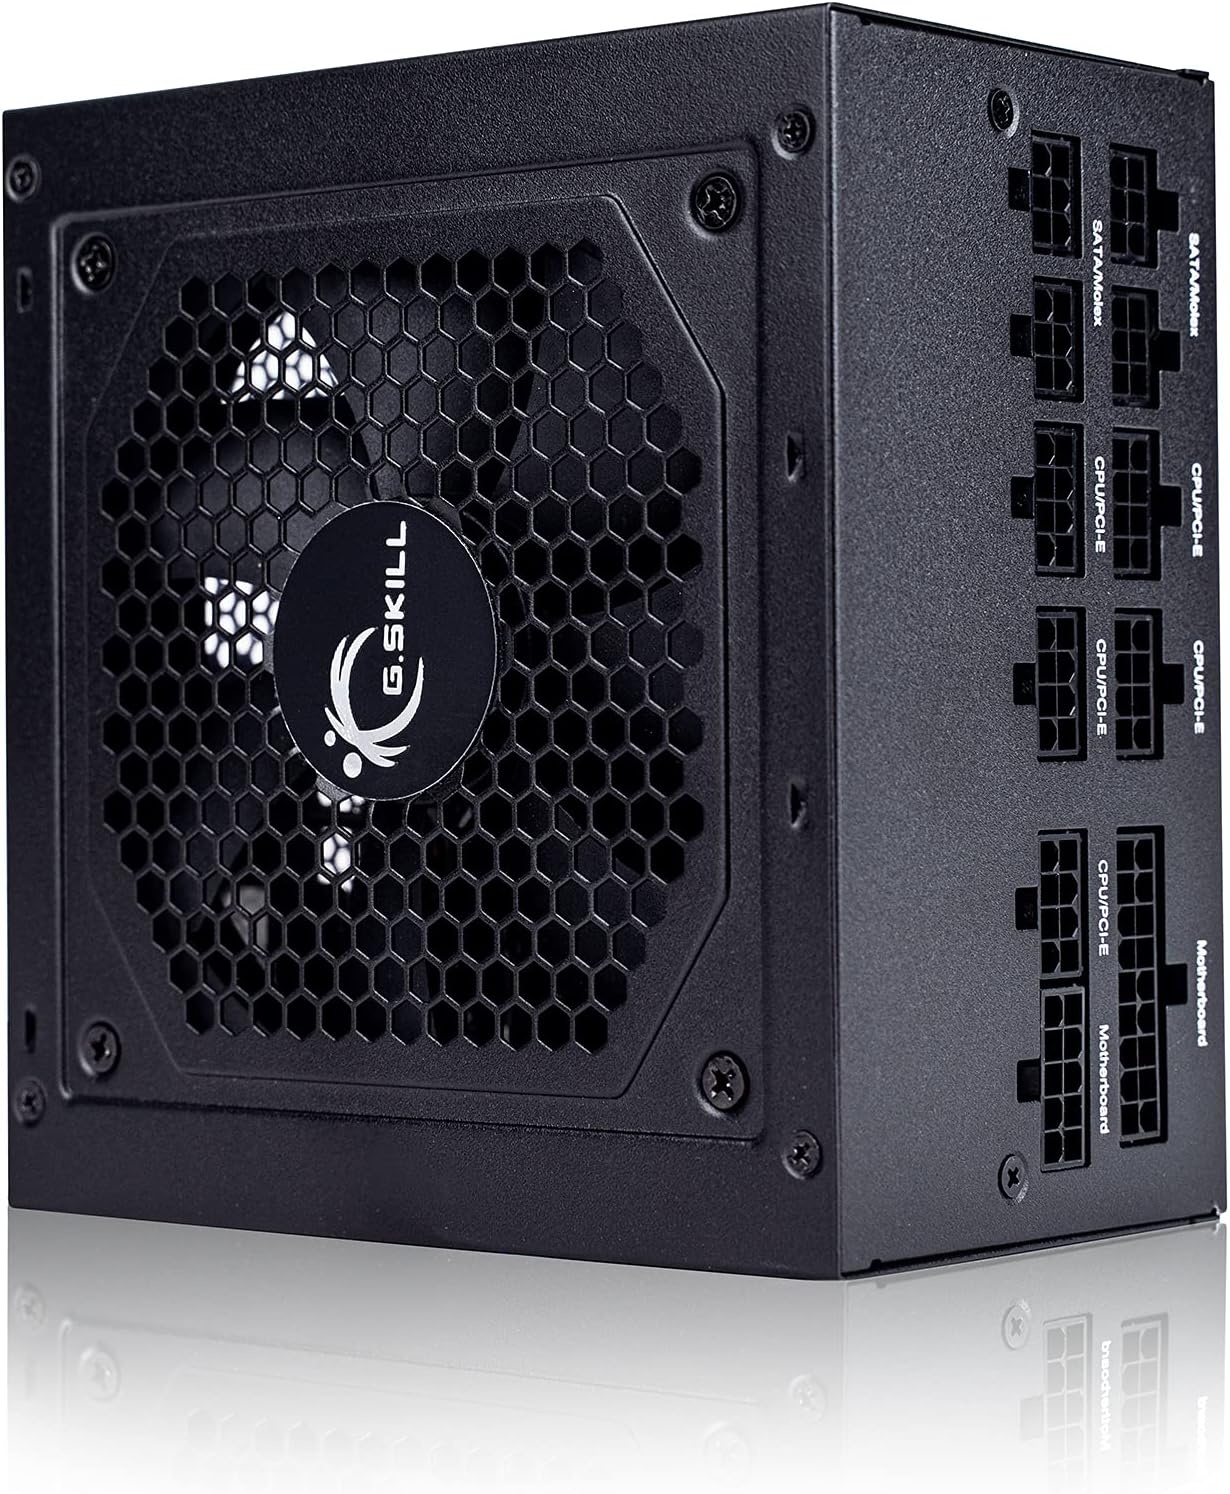 G.Skill MB850G PSU, 80 Plus Gold, Fully Modular ATX Power Supply 850 Watt, Compact 140mm Size, 120mm Cooling Fan, Gaming Computer Power Supply